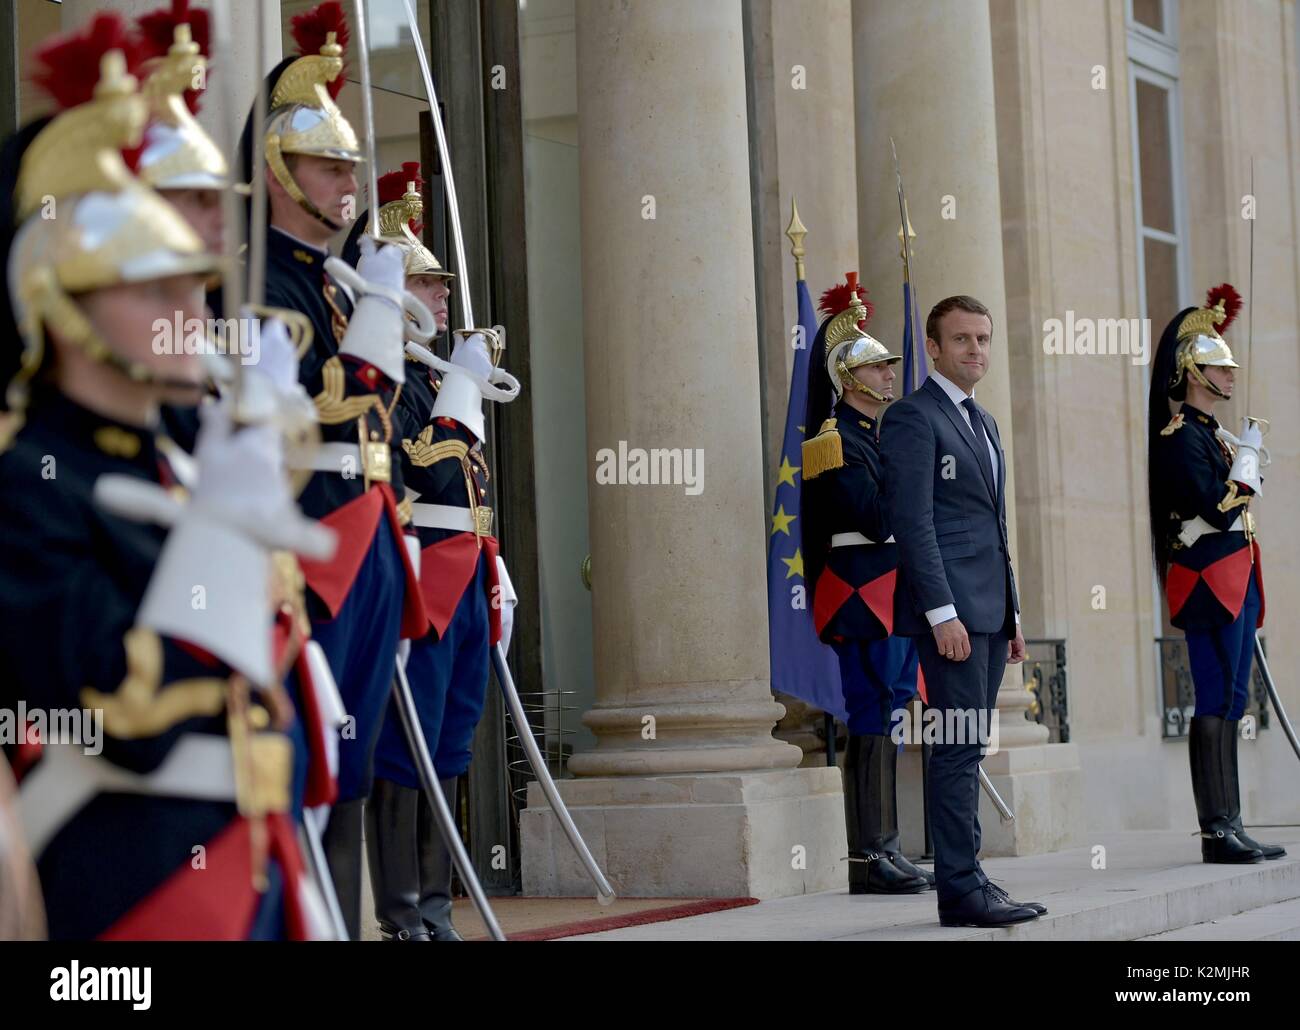 French President Emmanuel Macron waits to welcome Mexican President Enrique Pena Nieto for arrival ceremony at the Elysee Palace July 7, 2017 in Paris, France. Stock Photo